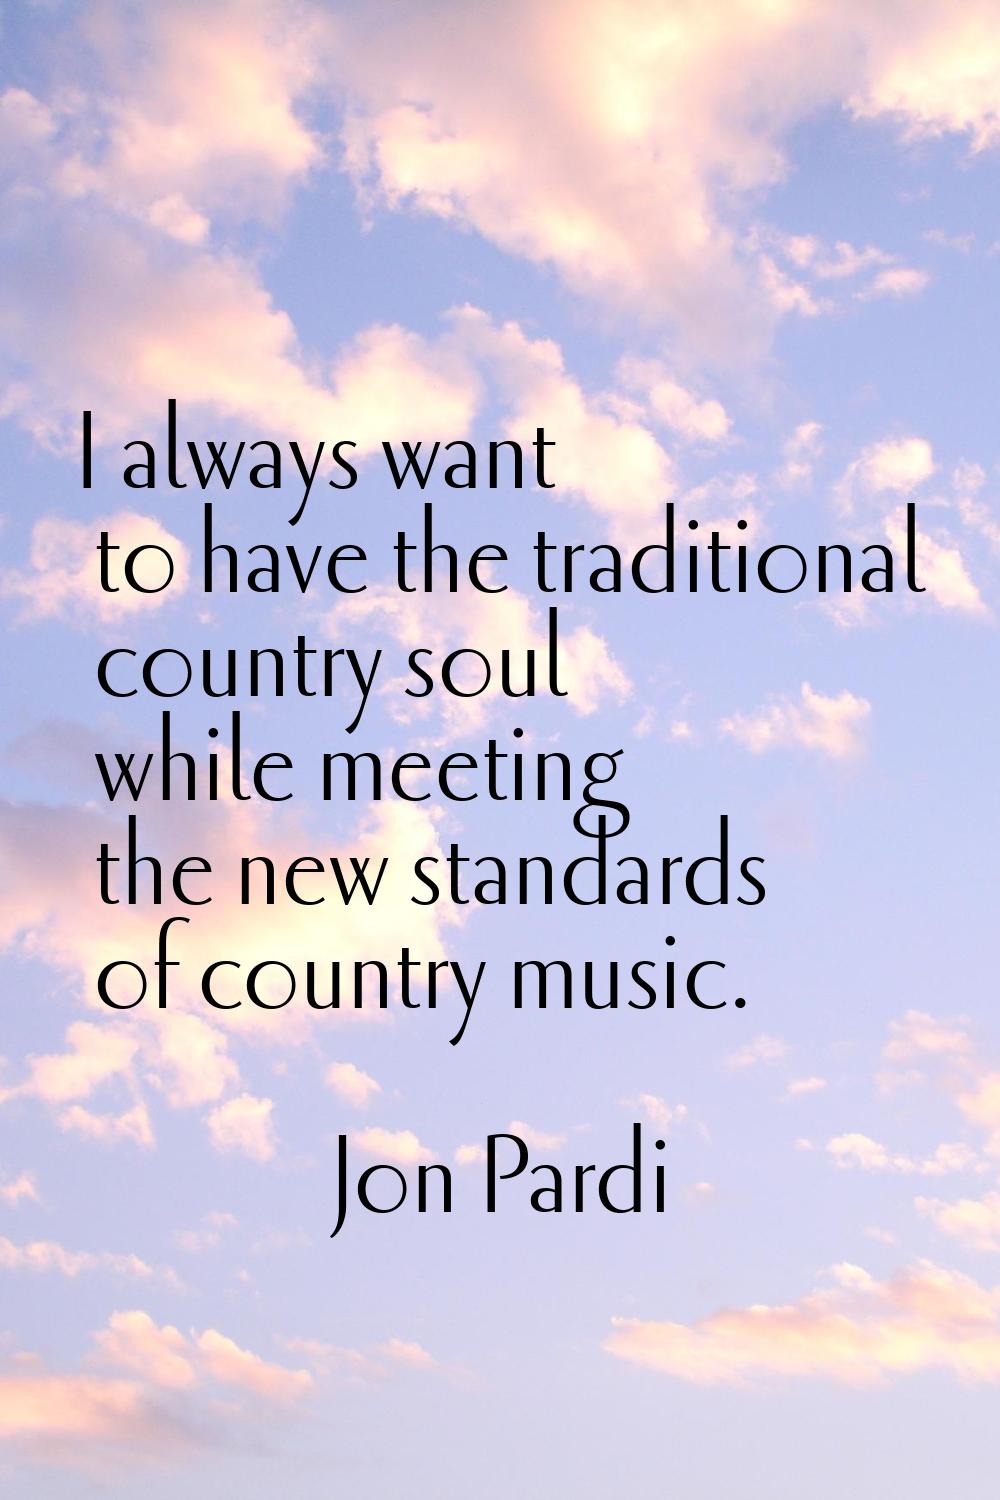 I always want to have the traditional country soul while meeting the new standards of country music